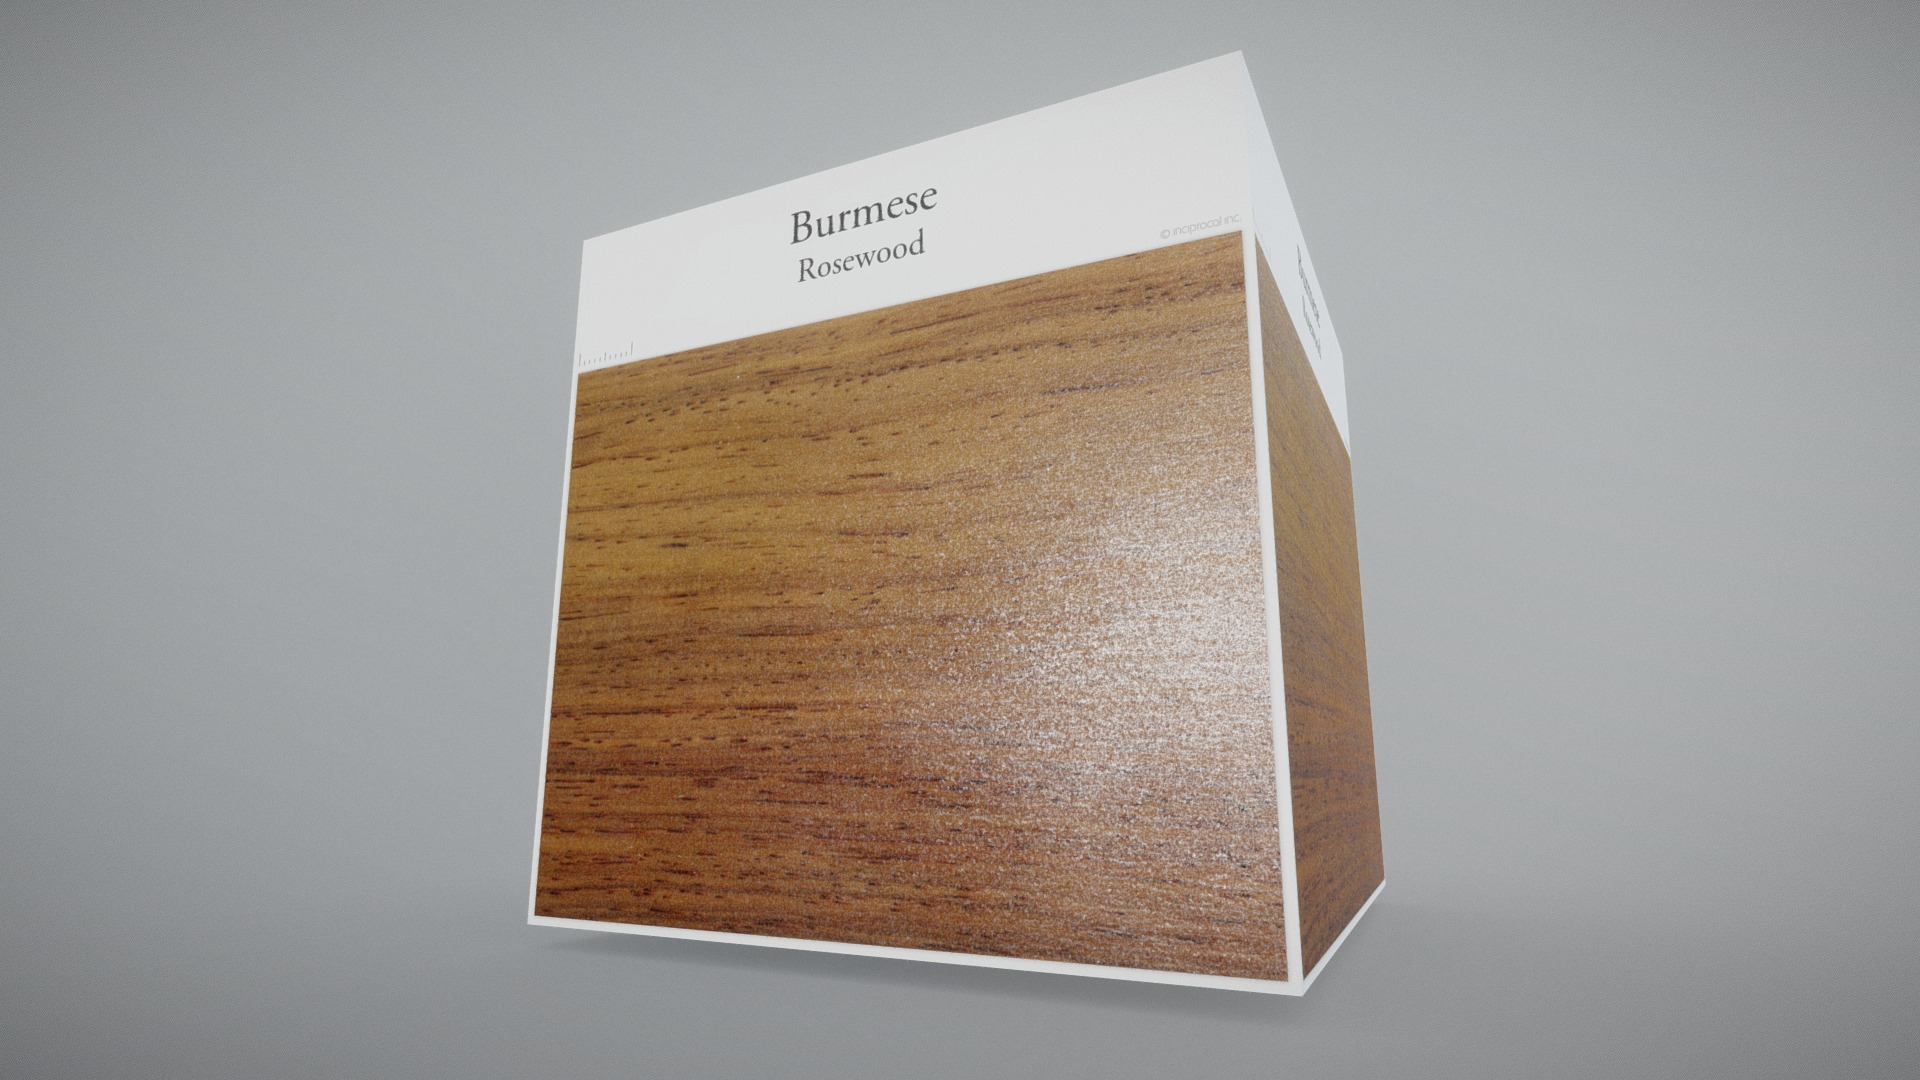 3D model Burmese (Rosewood) - This is a 3D model of the Burmese (Rosewood). The 3D model is about a box with a label on it.